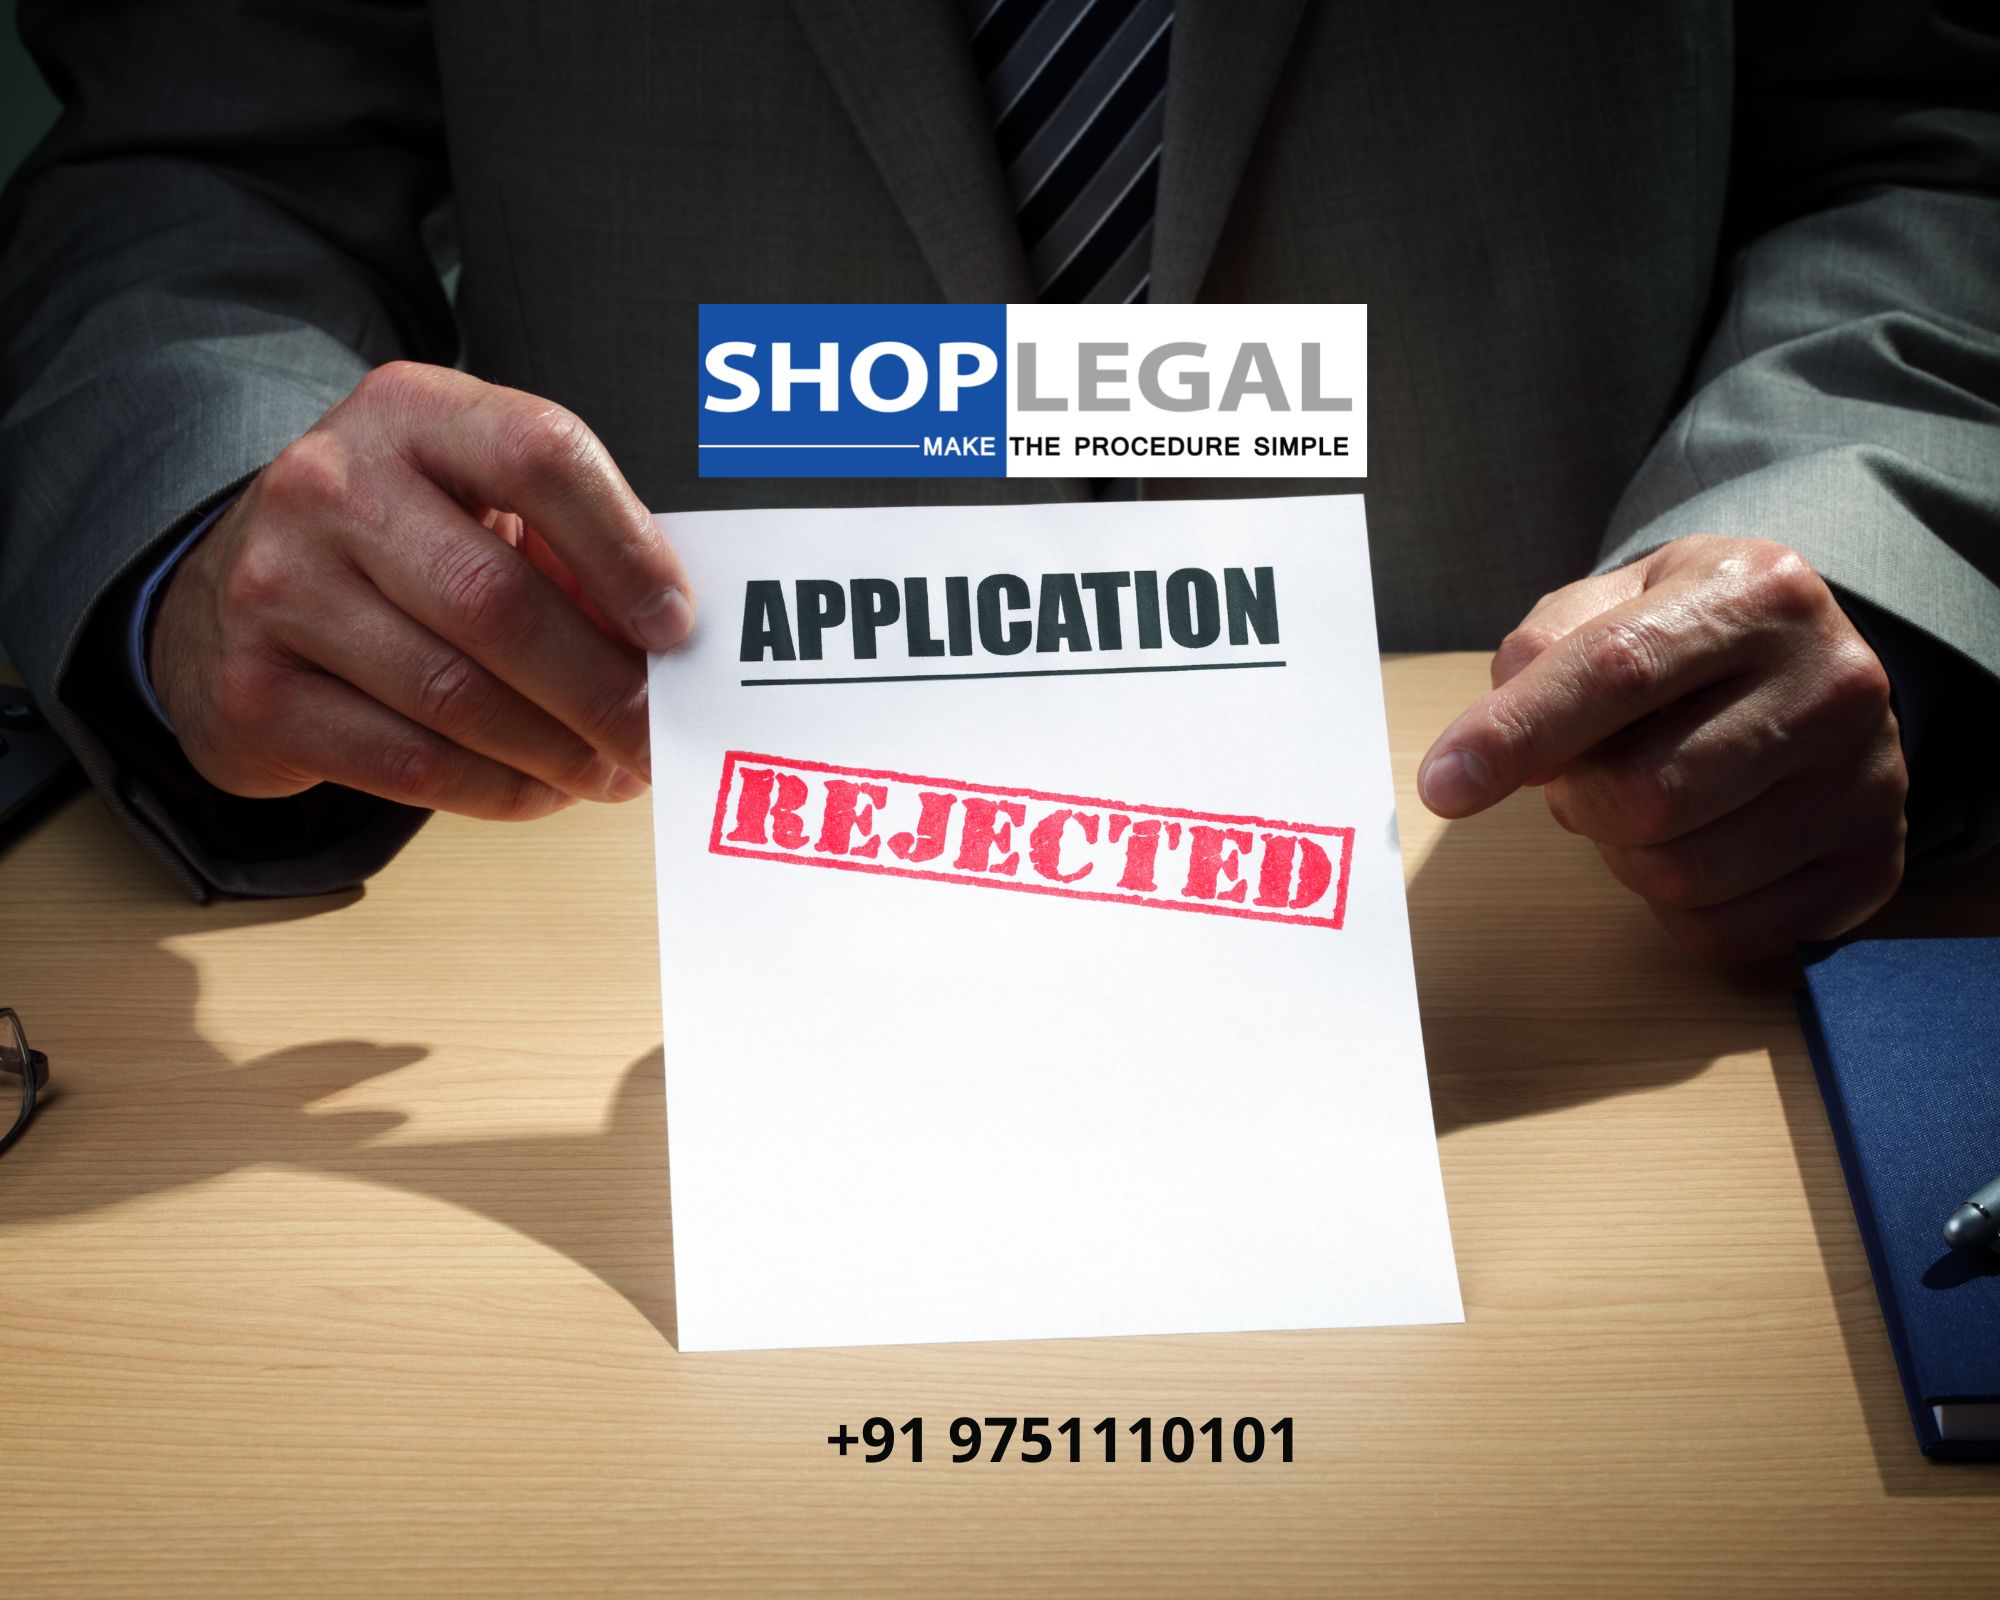 What happens if FSSAI application is rejected?